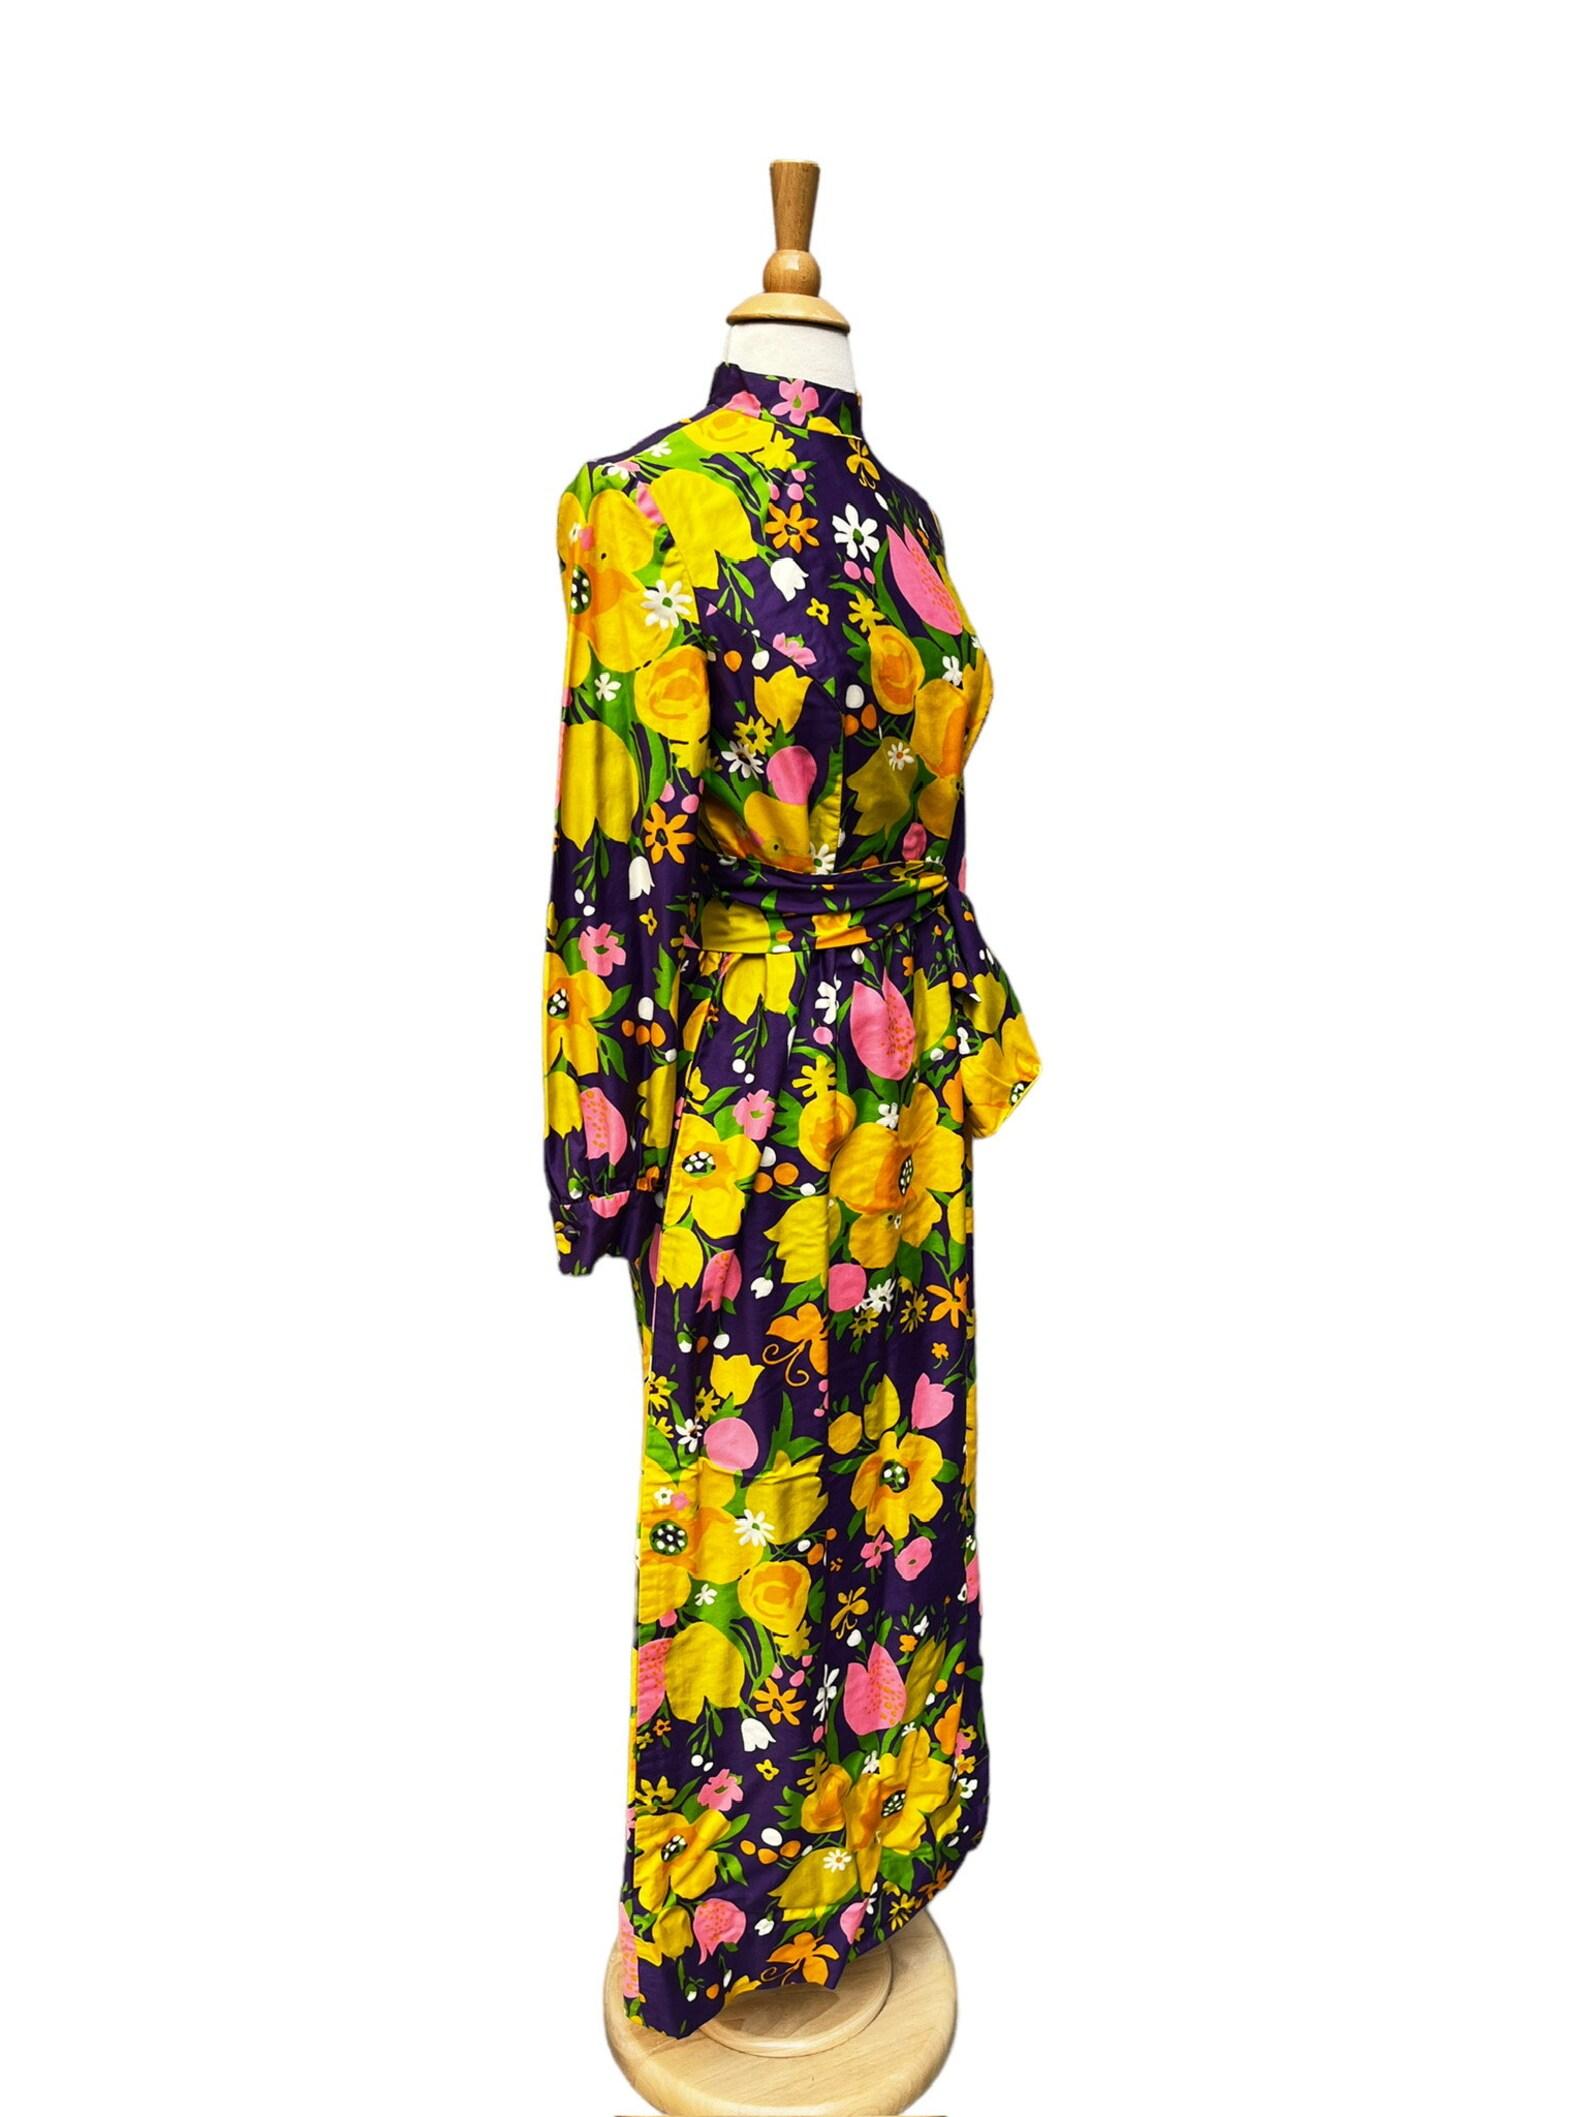 Brenner Couture Floral Maxi Dress, Circa 1970s In Excellent Condition For Sale In Brooklyn, NY